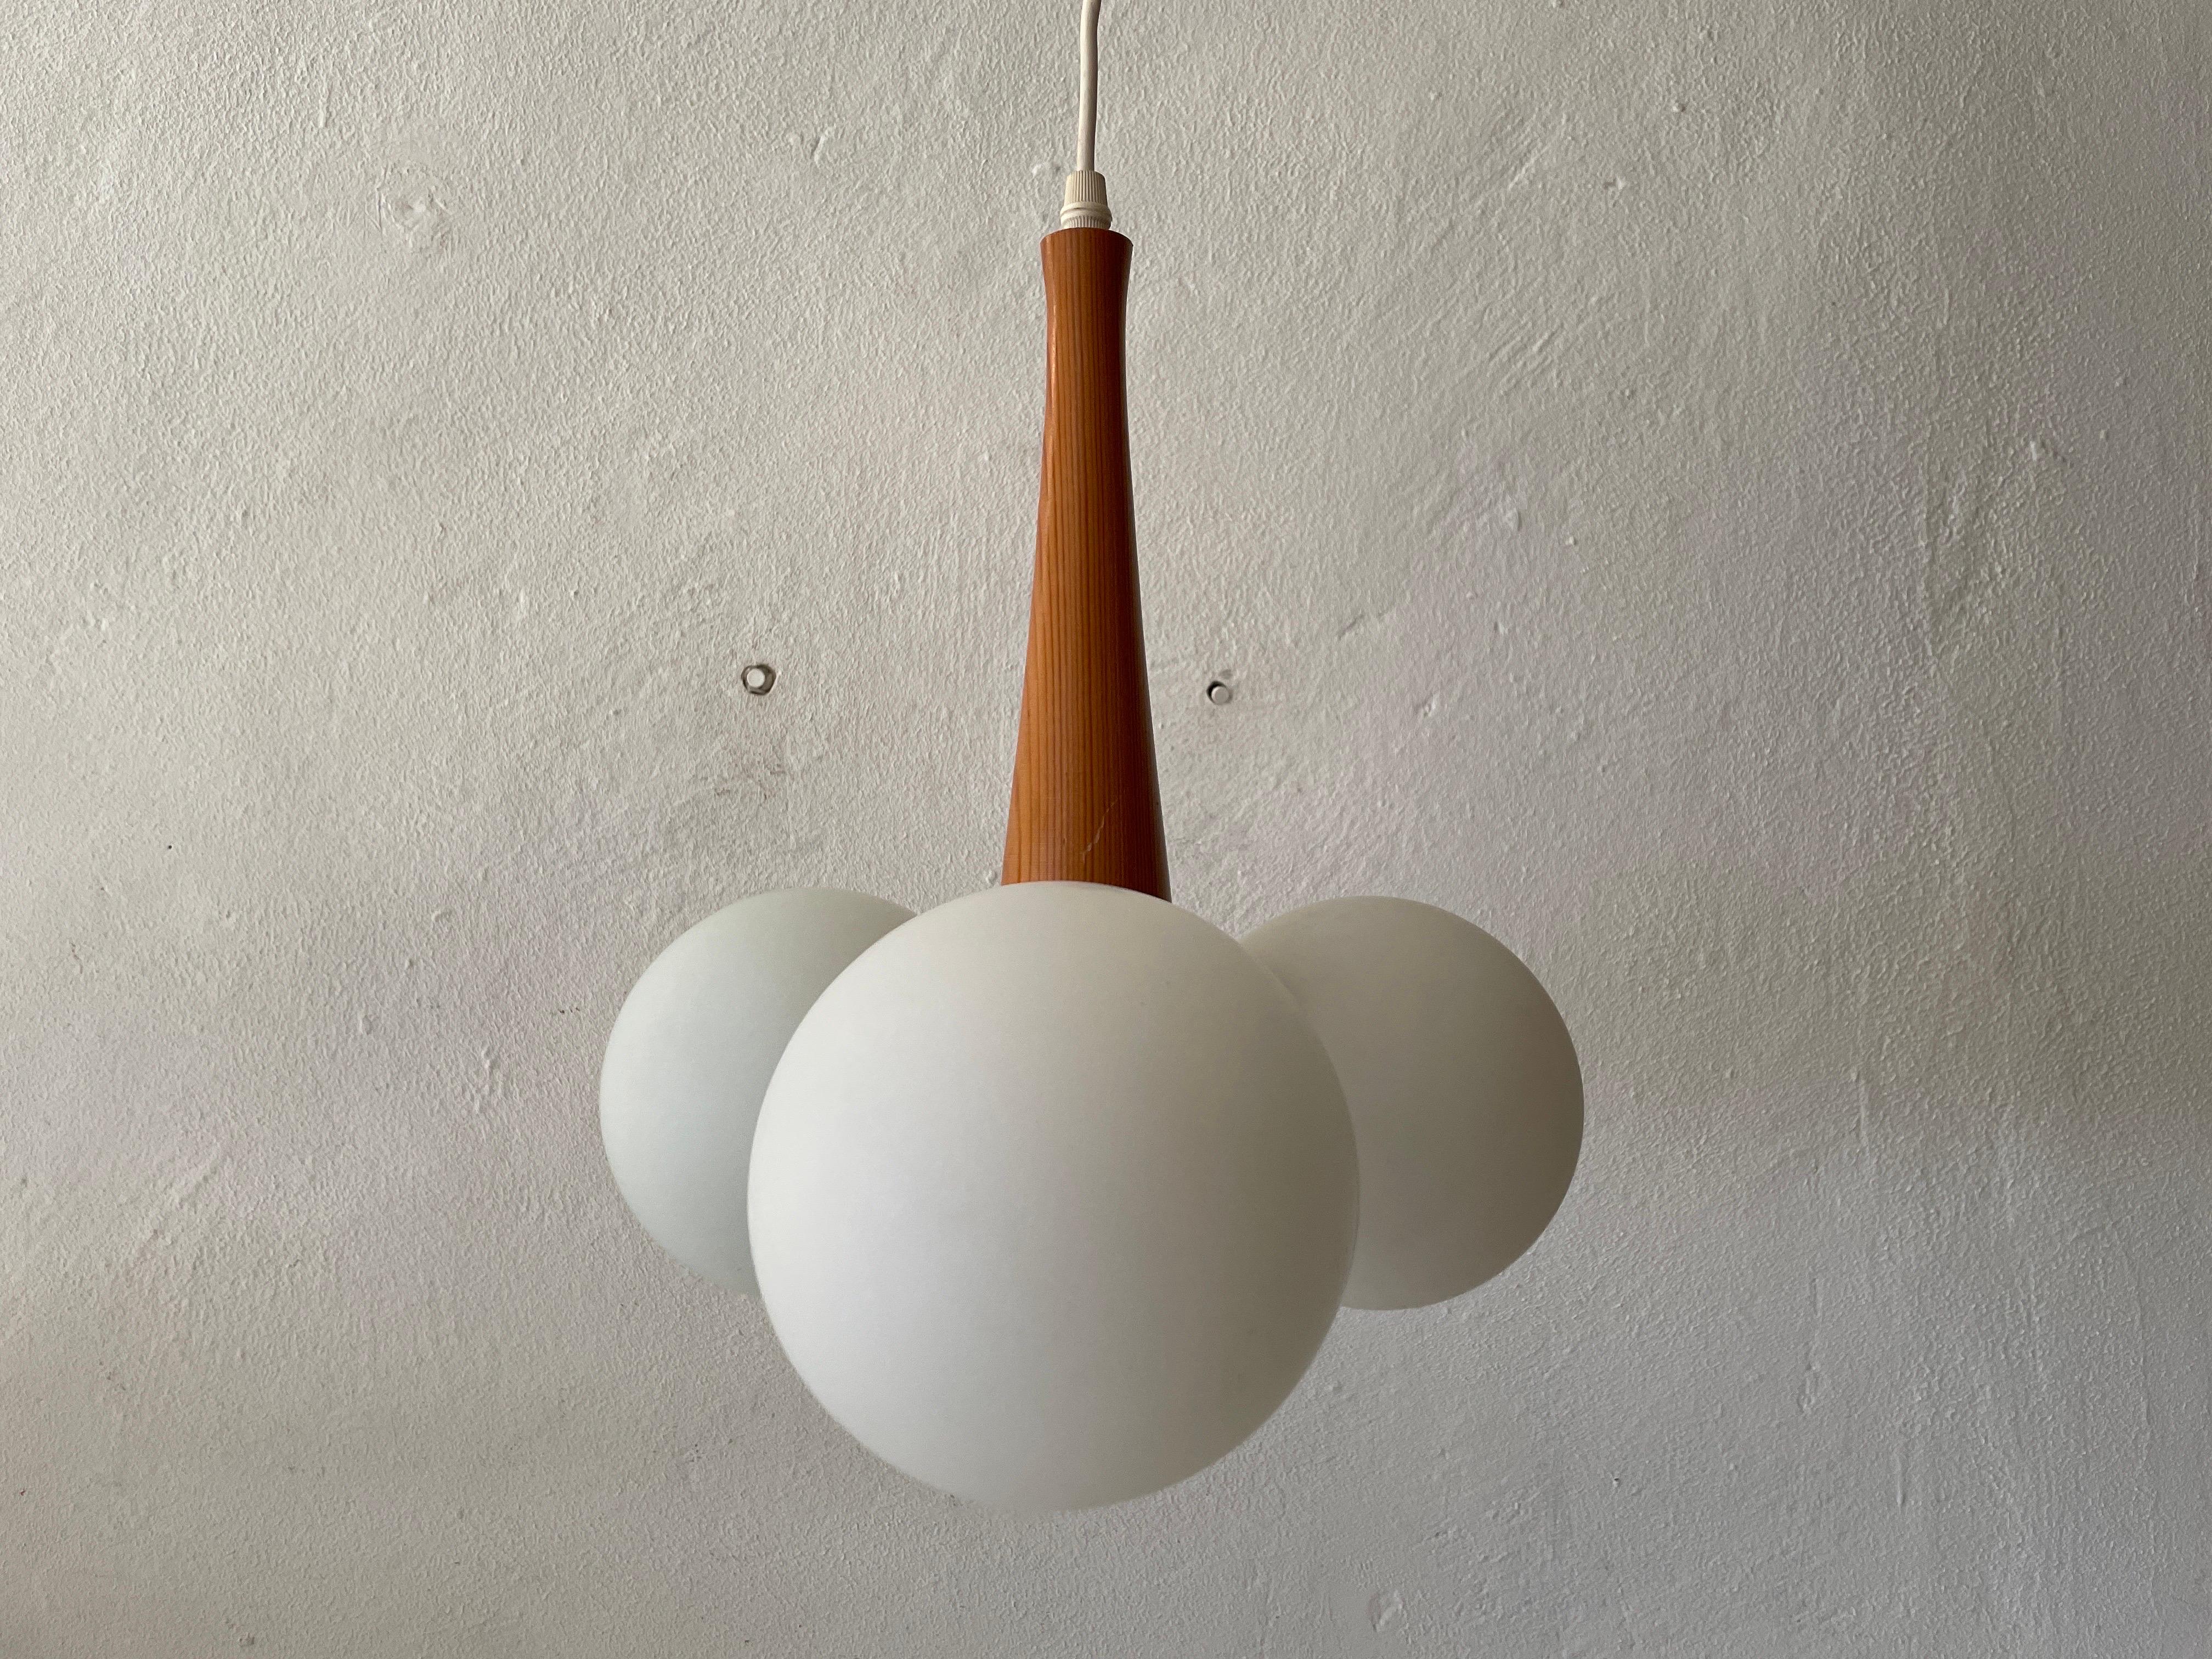 3 Opal Ball Glass and Wood Body Atomic Ceiling Lamp, 1970s, Germany

Lampshade is in good condition and very clean. 
This lamp works with 3 x E14 light bulb. 
Wired and suitable to use with 220V and 110V for all